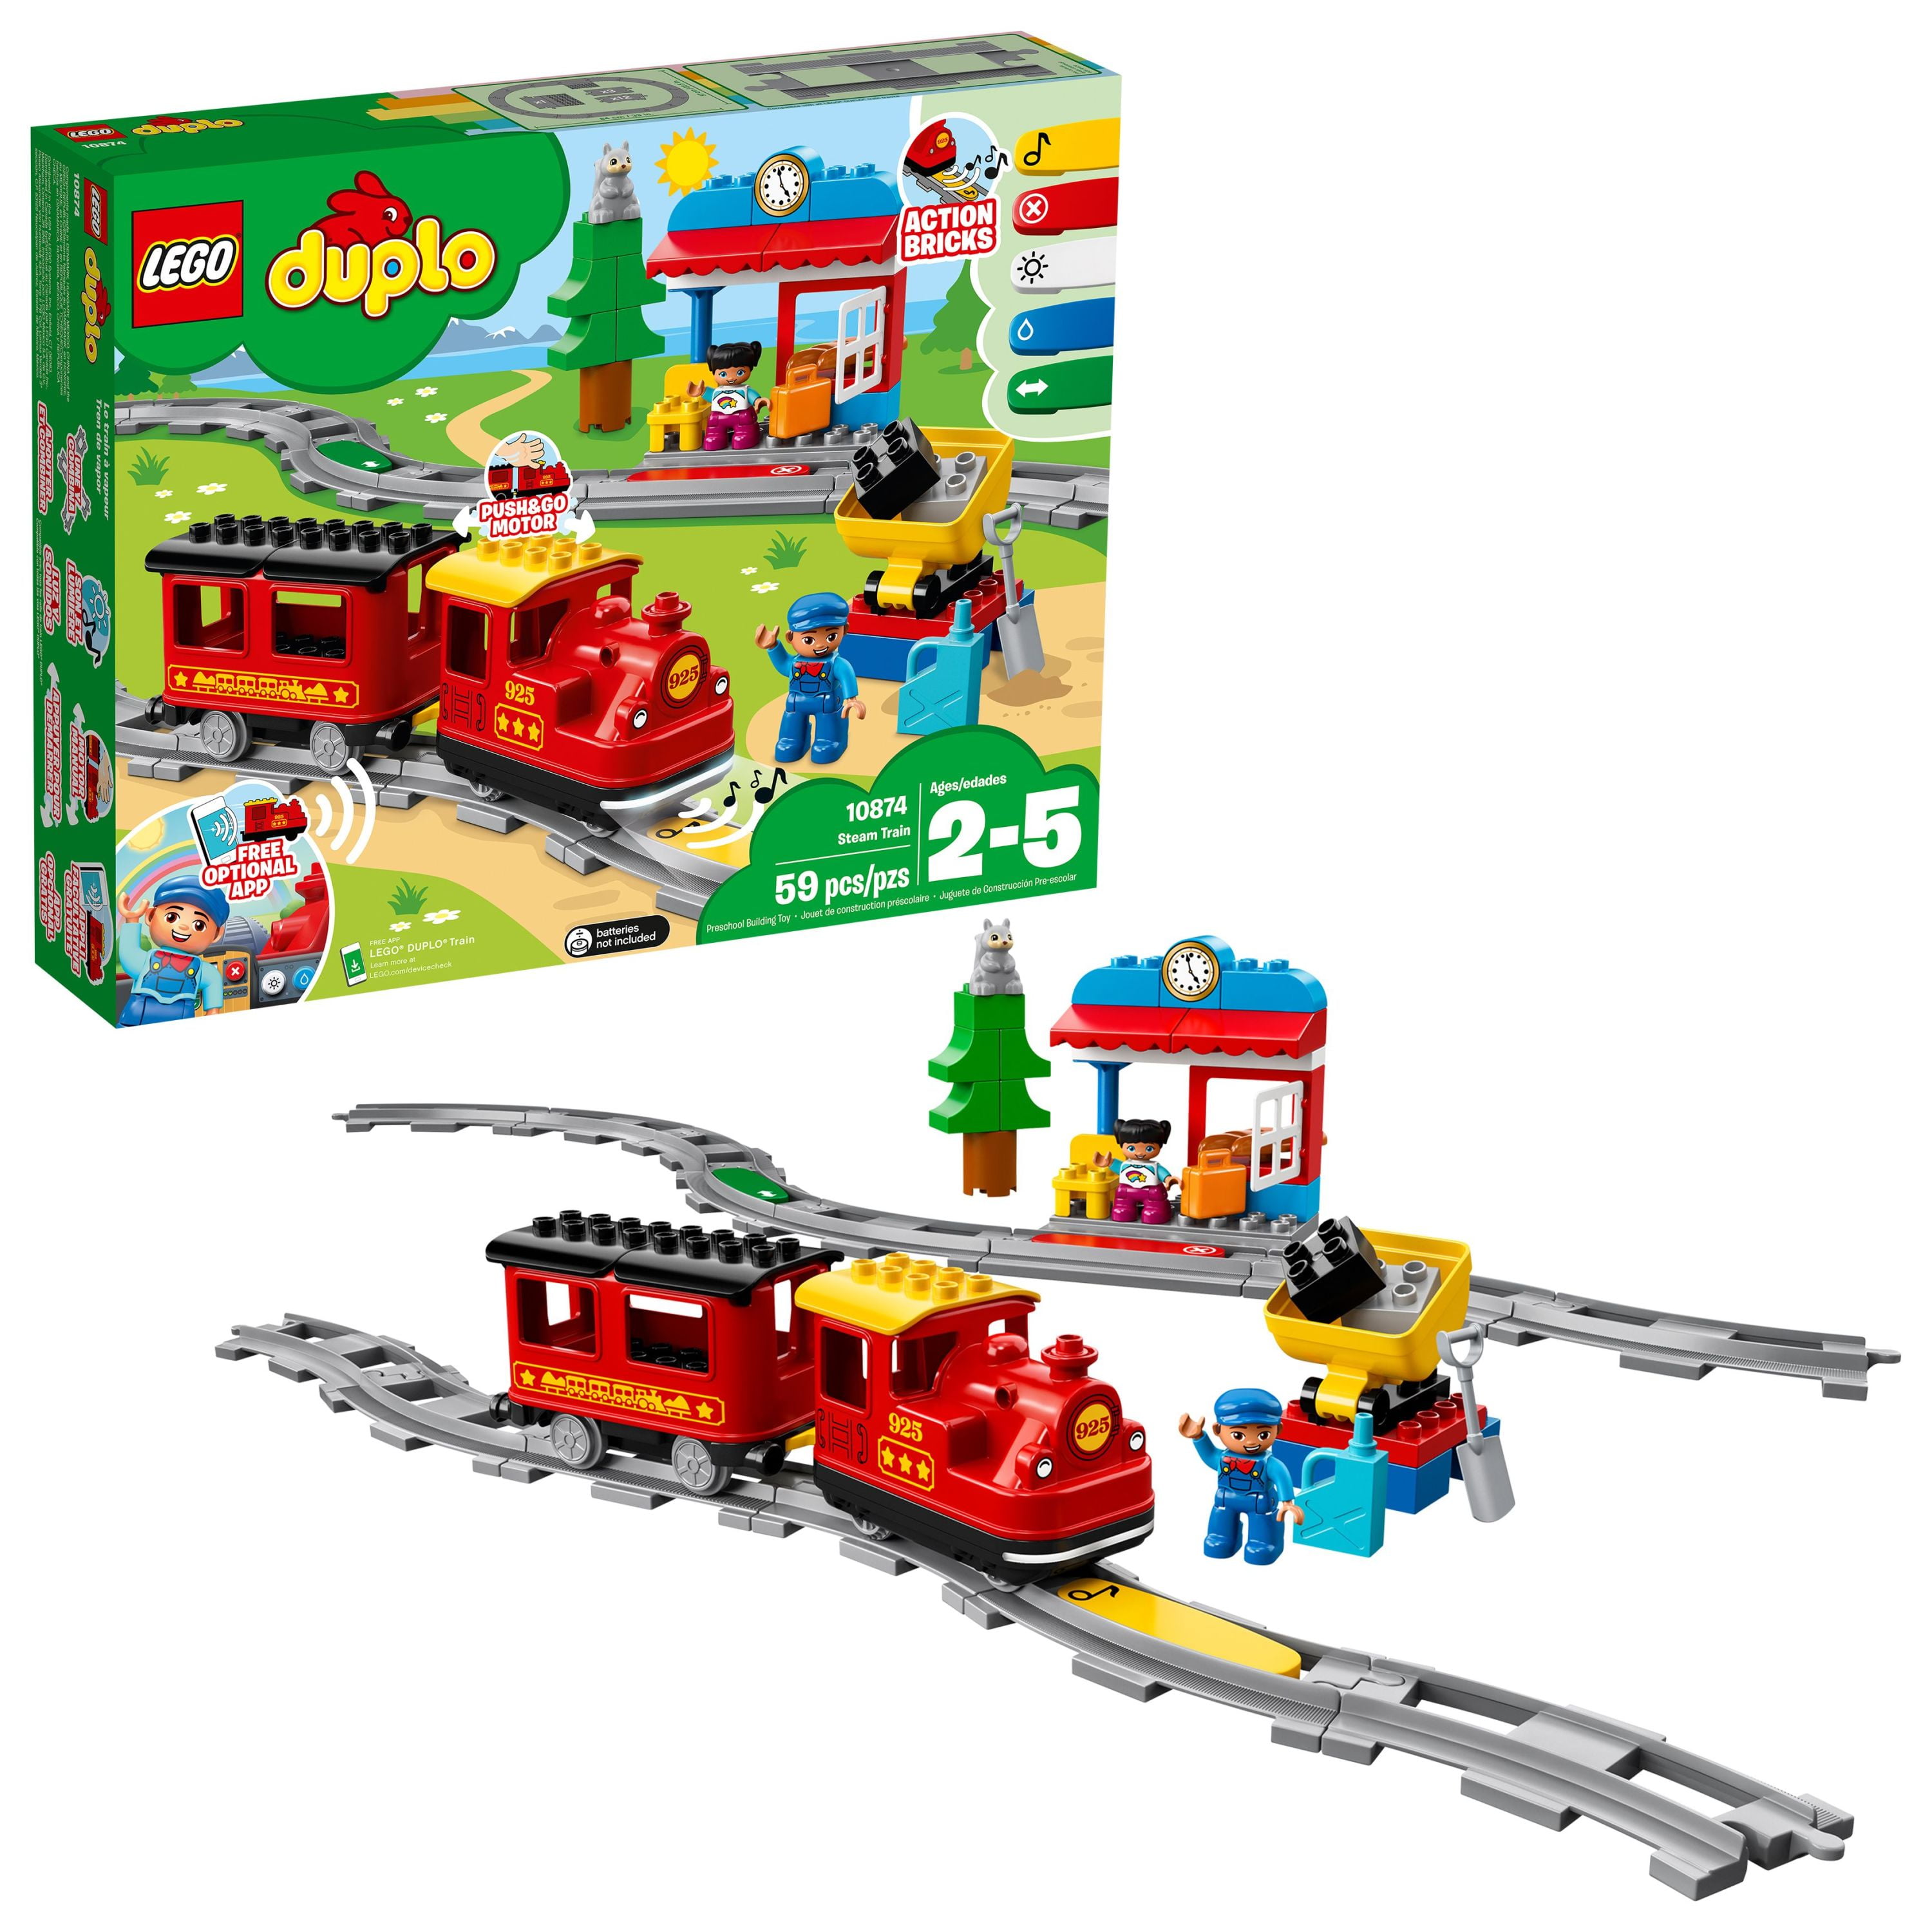 Darmen Knuppel Gecomprimeerd LEGO DUPLO Town Steam Train 10874, Toys for Toddlers, Boys and Girls 2 - 5  Years Old with Light & Sound, Push & Go Battery Powered Set with RC  Function, Gift Idea - Walmart.com